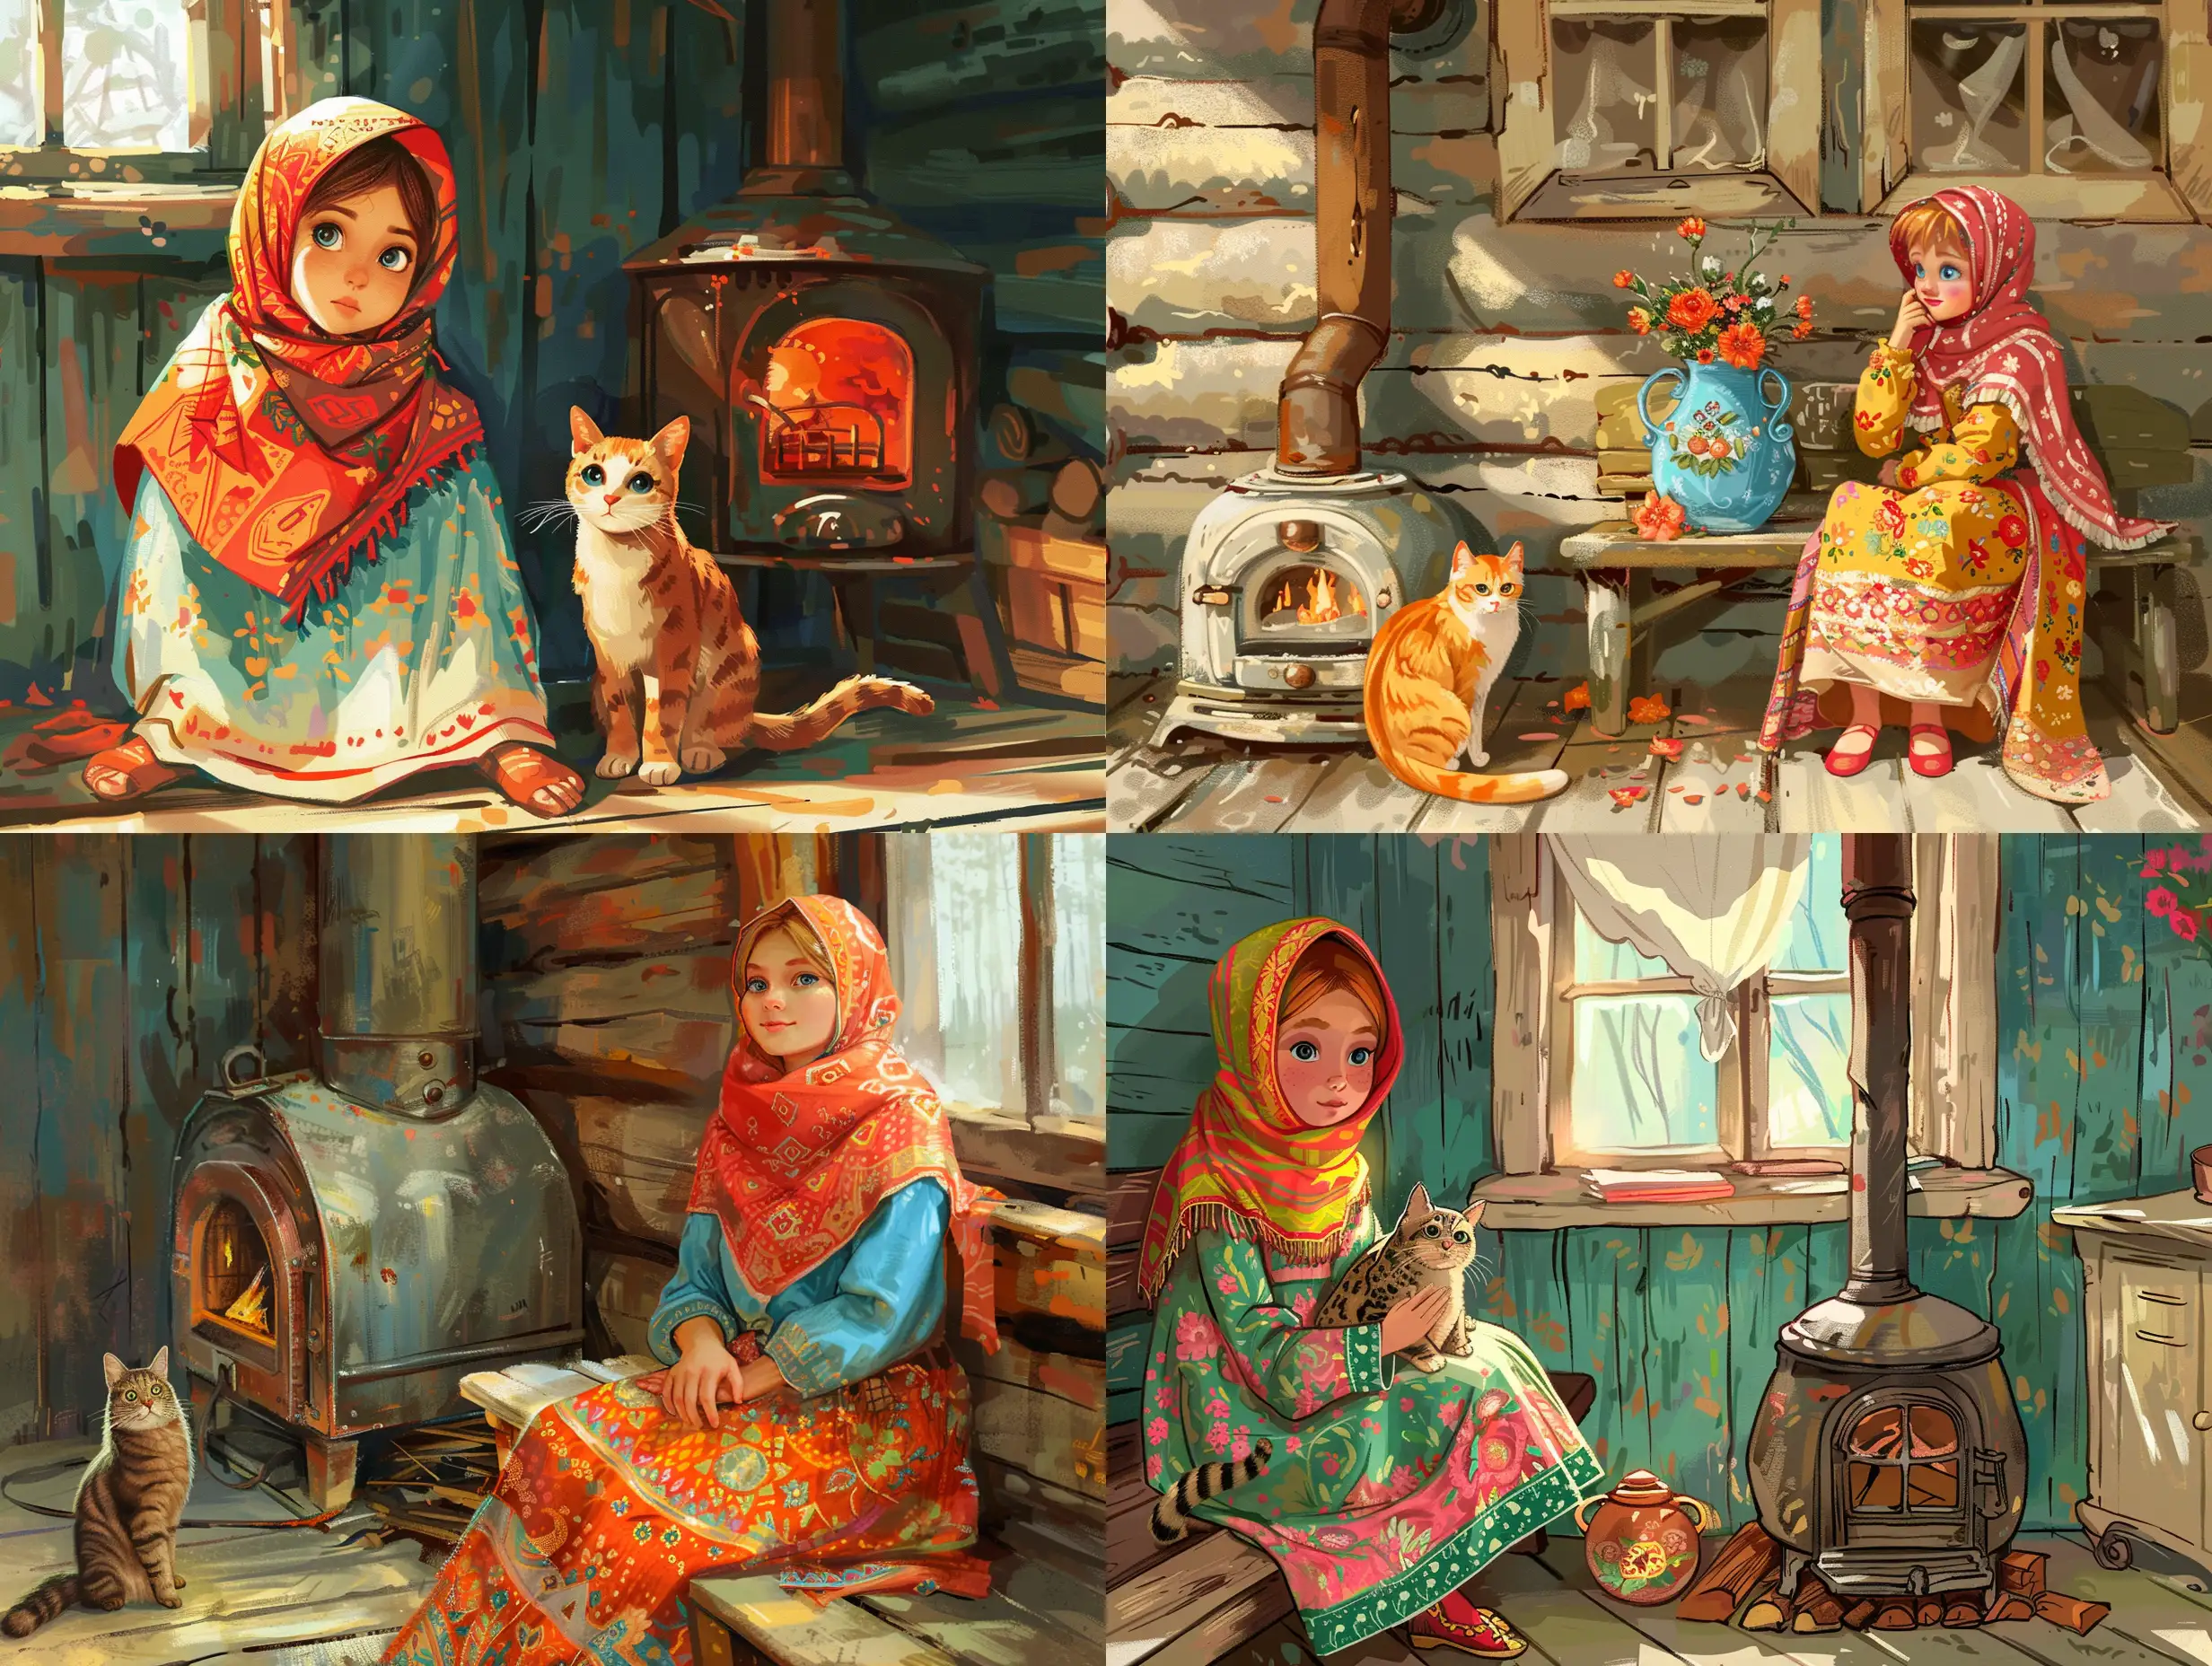 Russian-Girl-in-Traditional-Dress-with-Cat-by-Old-Russian-Stove